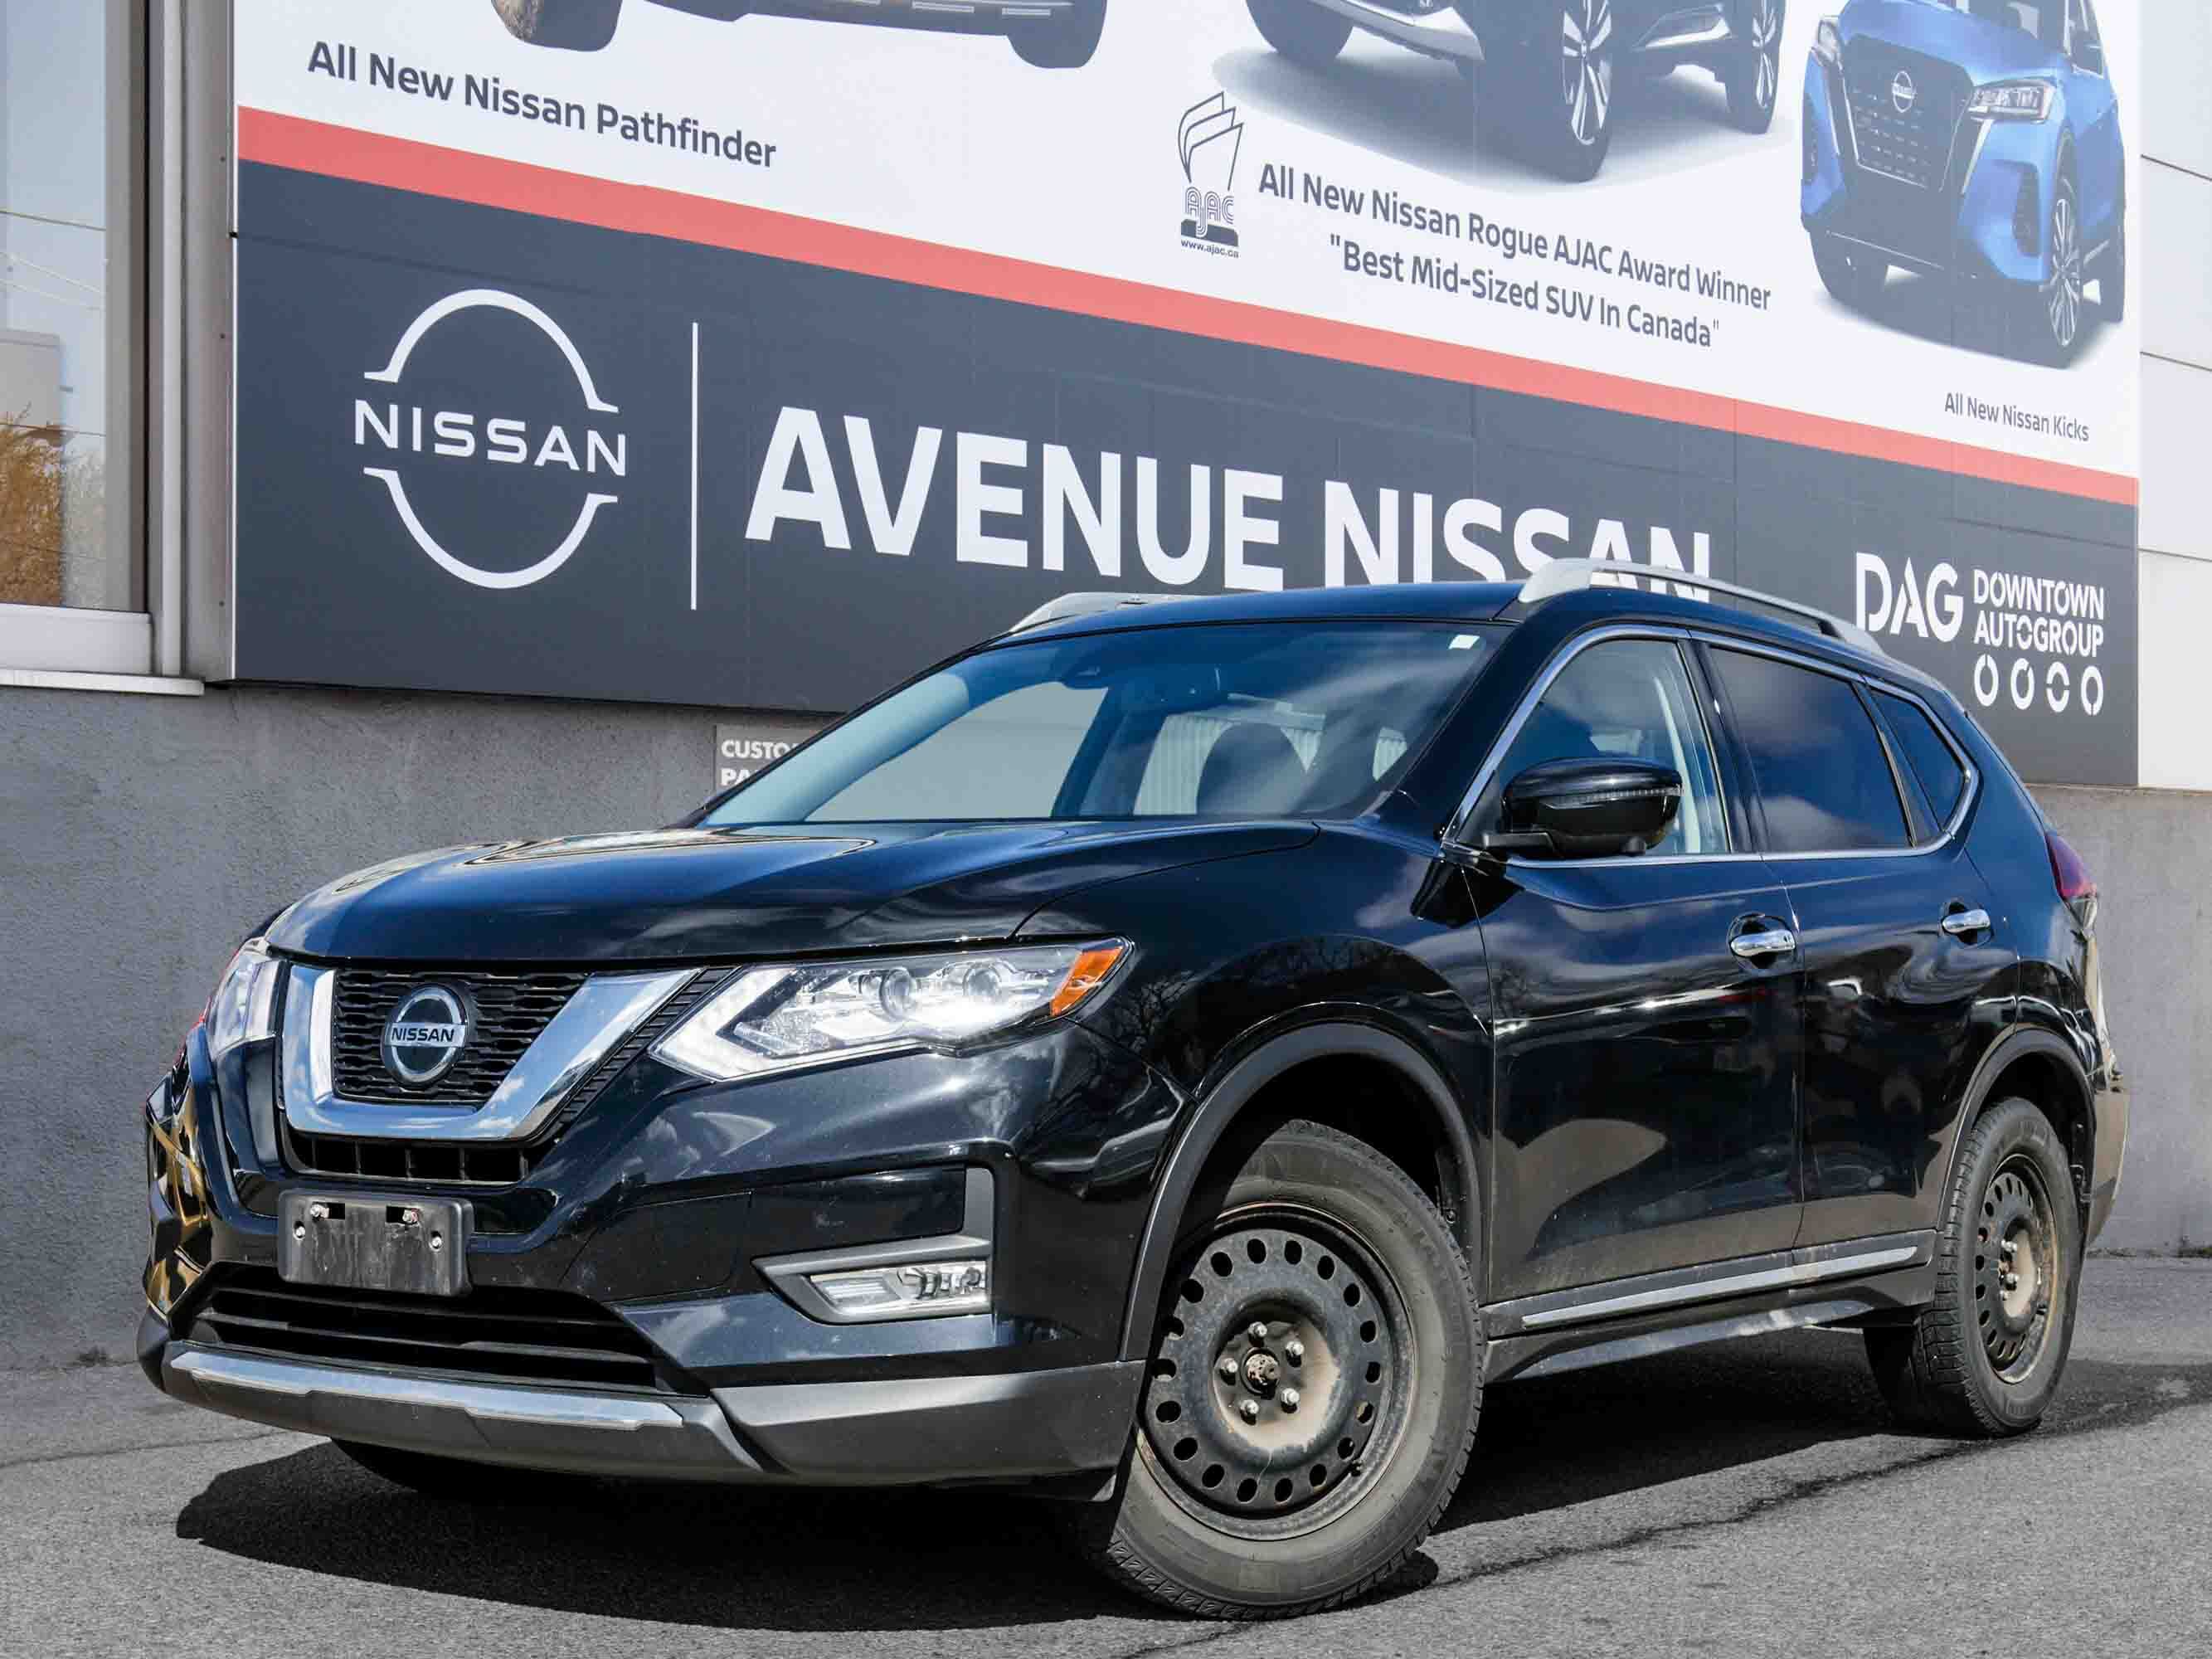 2019 Nissan Rogue TOP OF THE LINE, LOW KM'S, 1 OWNER, NAVI, ROOF!!